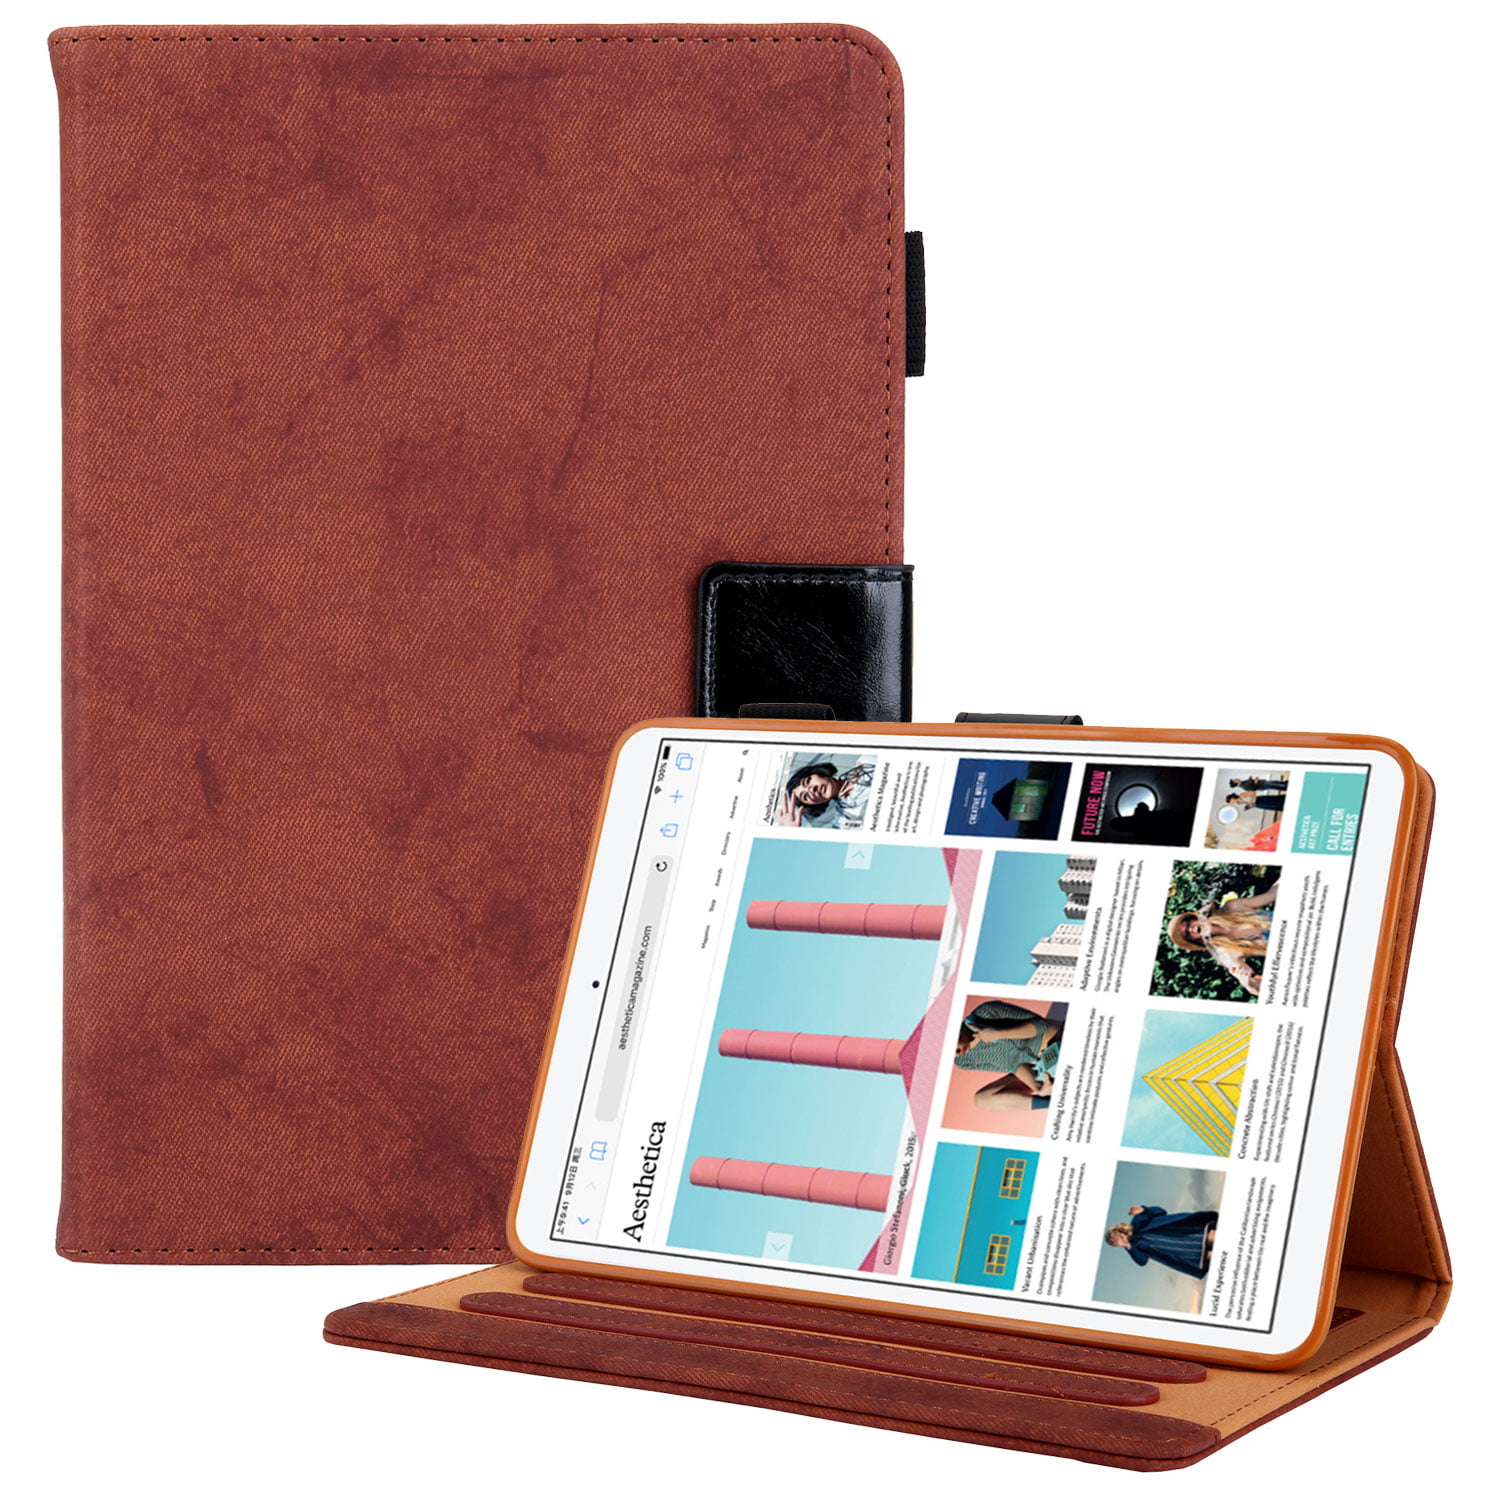 Brown RuiRdot Lightweight PU Leather Book Folio Stand Case Multi-Viewing Kickstand Case with Card Slots//Pocket Compatible for 2021 New iPad Mini 6th Generation 8.3 inch iPad Mini 6 Stand Cover